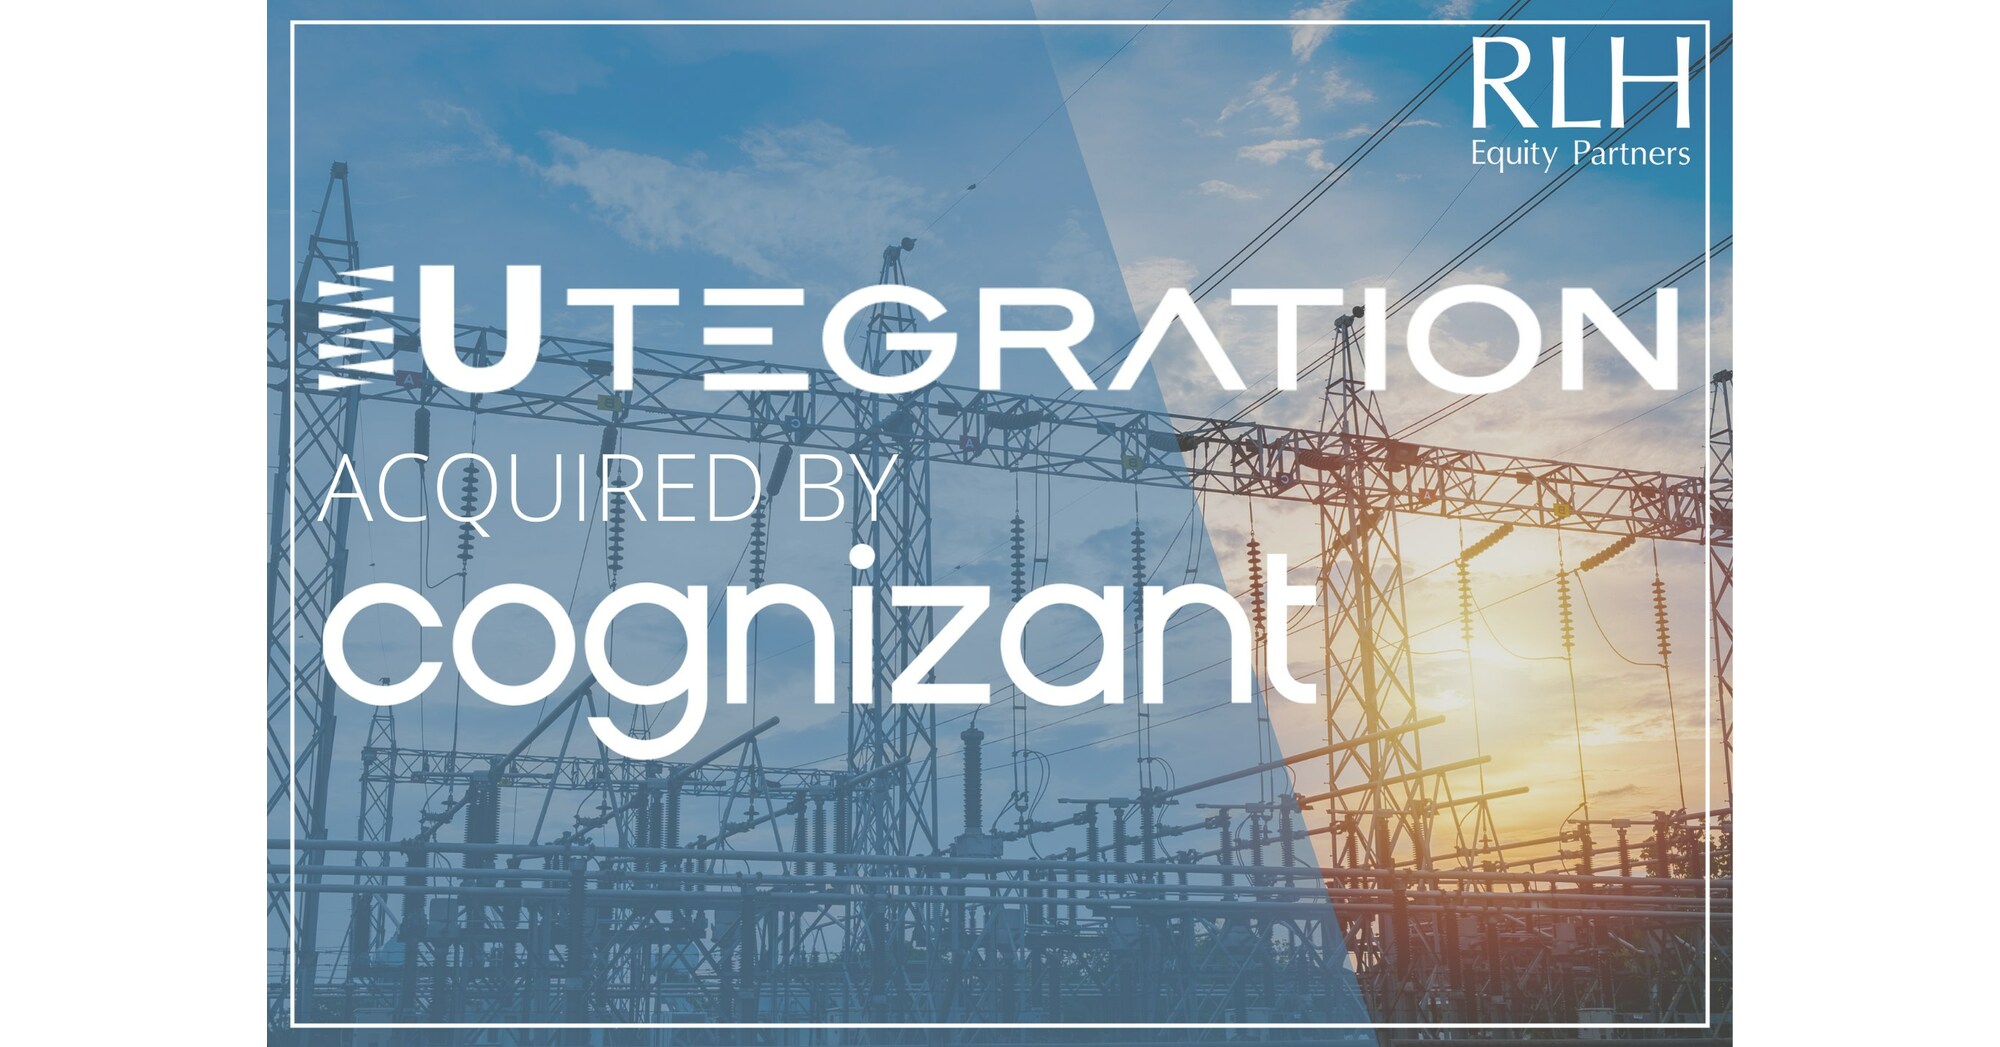 Utegration Acquired by Cognizant